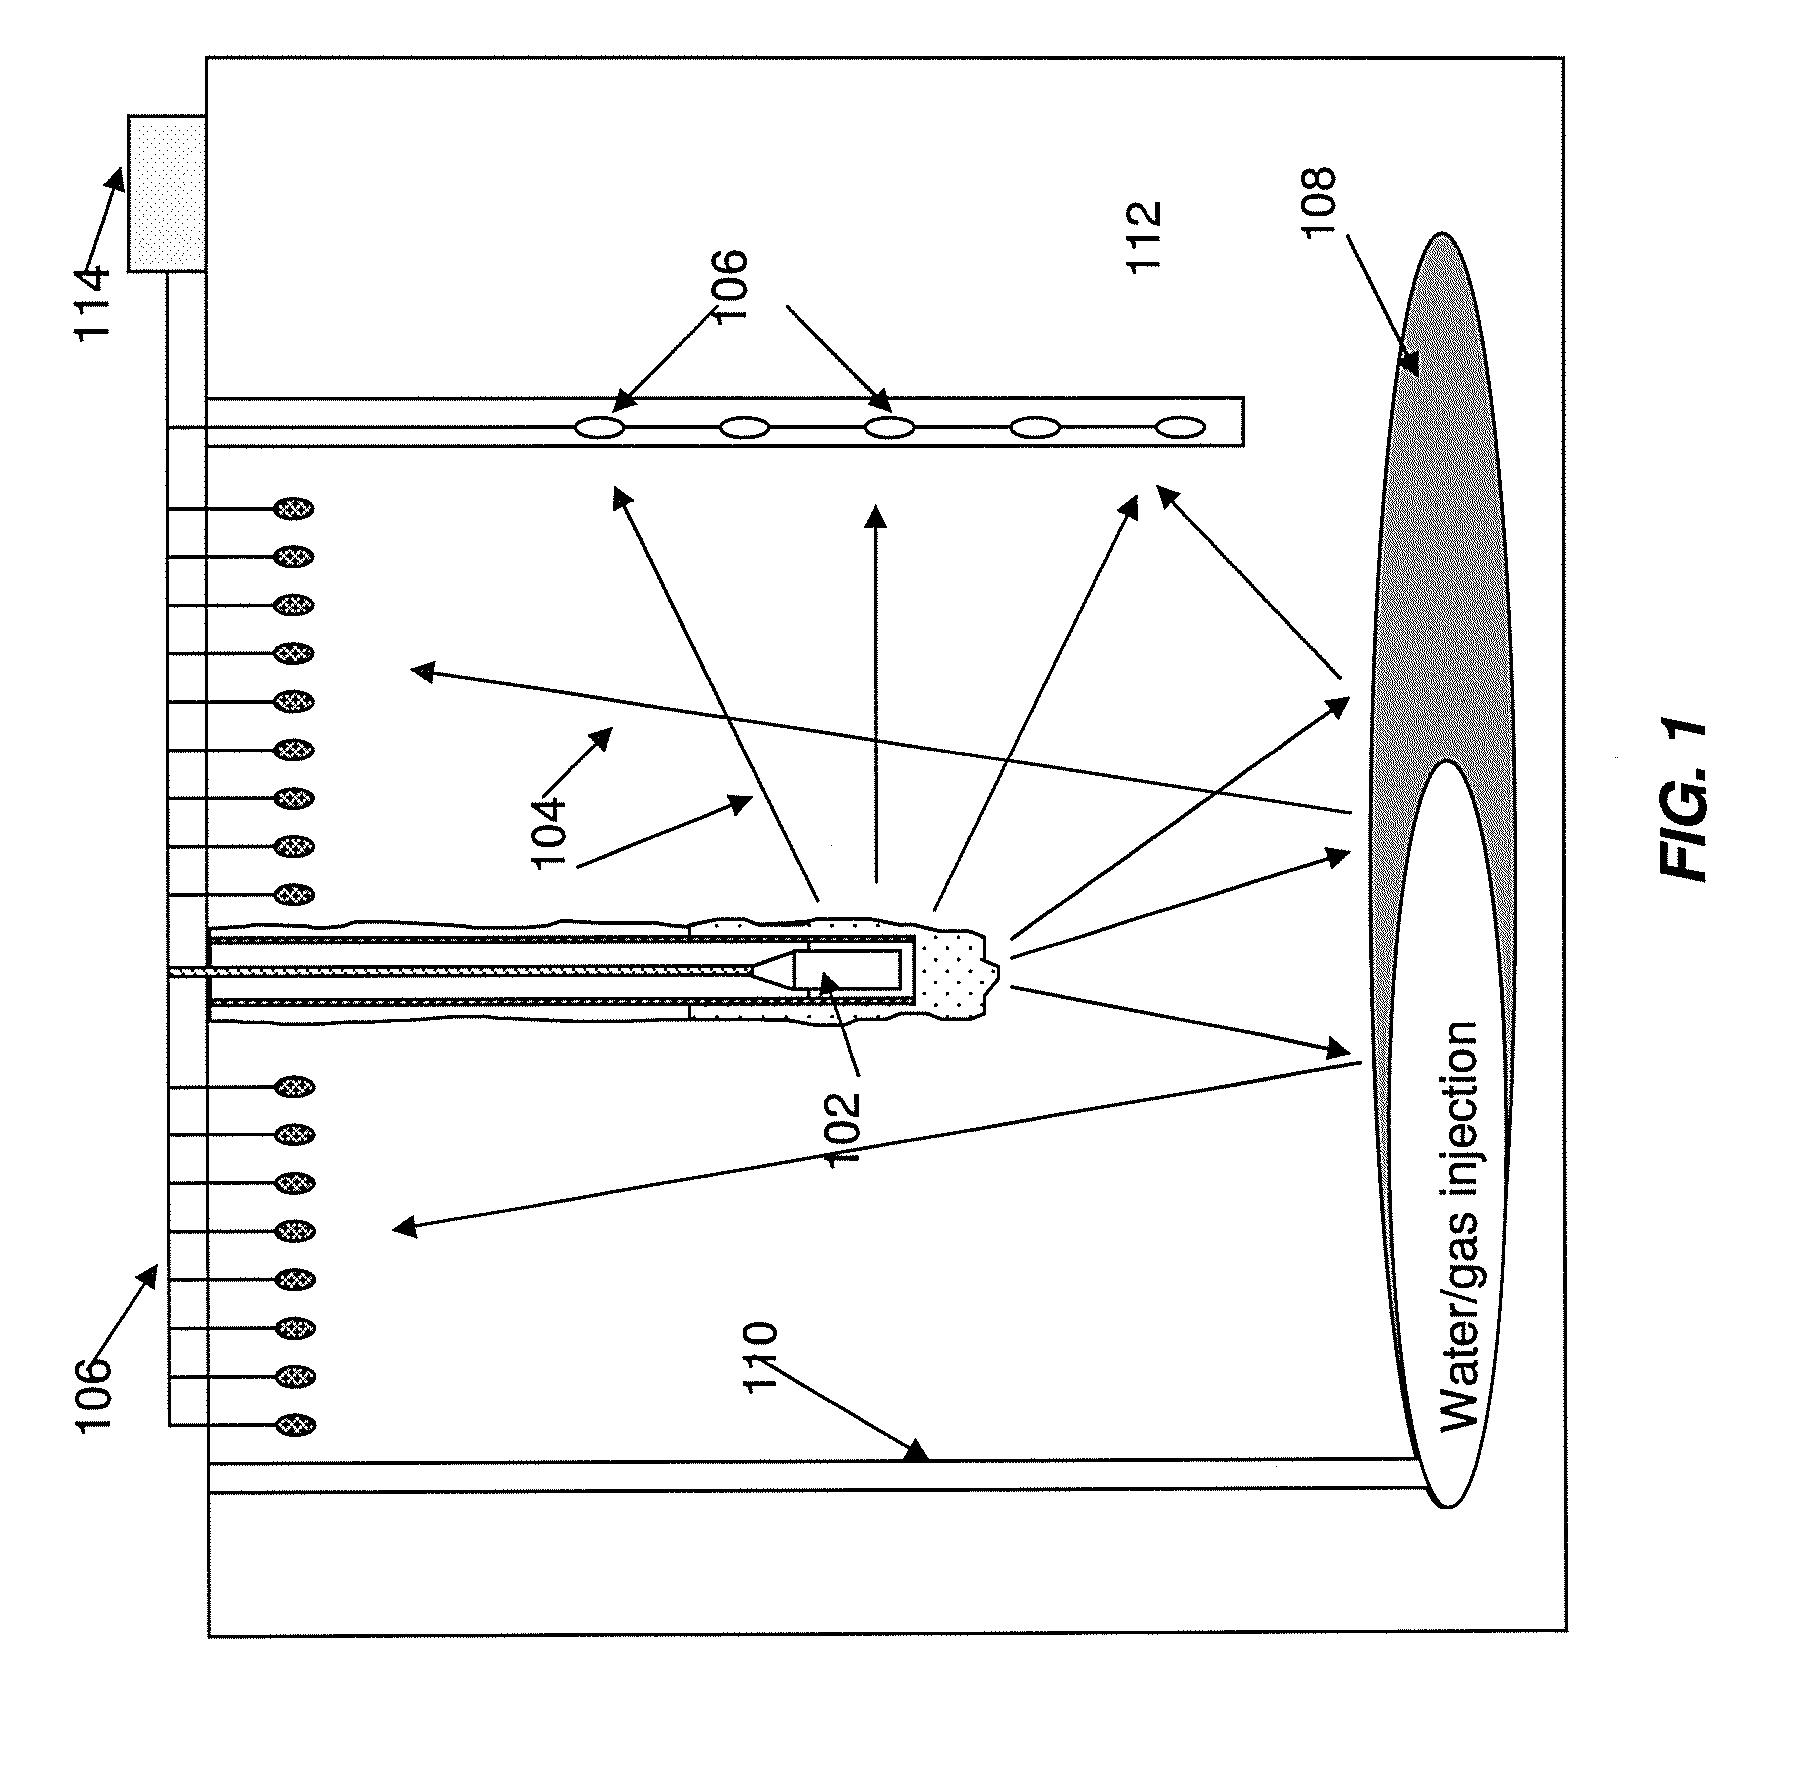 Methods and systems for deploying seismic devices